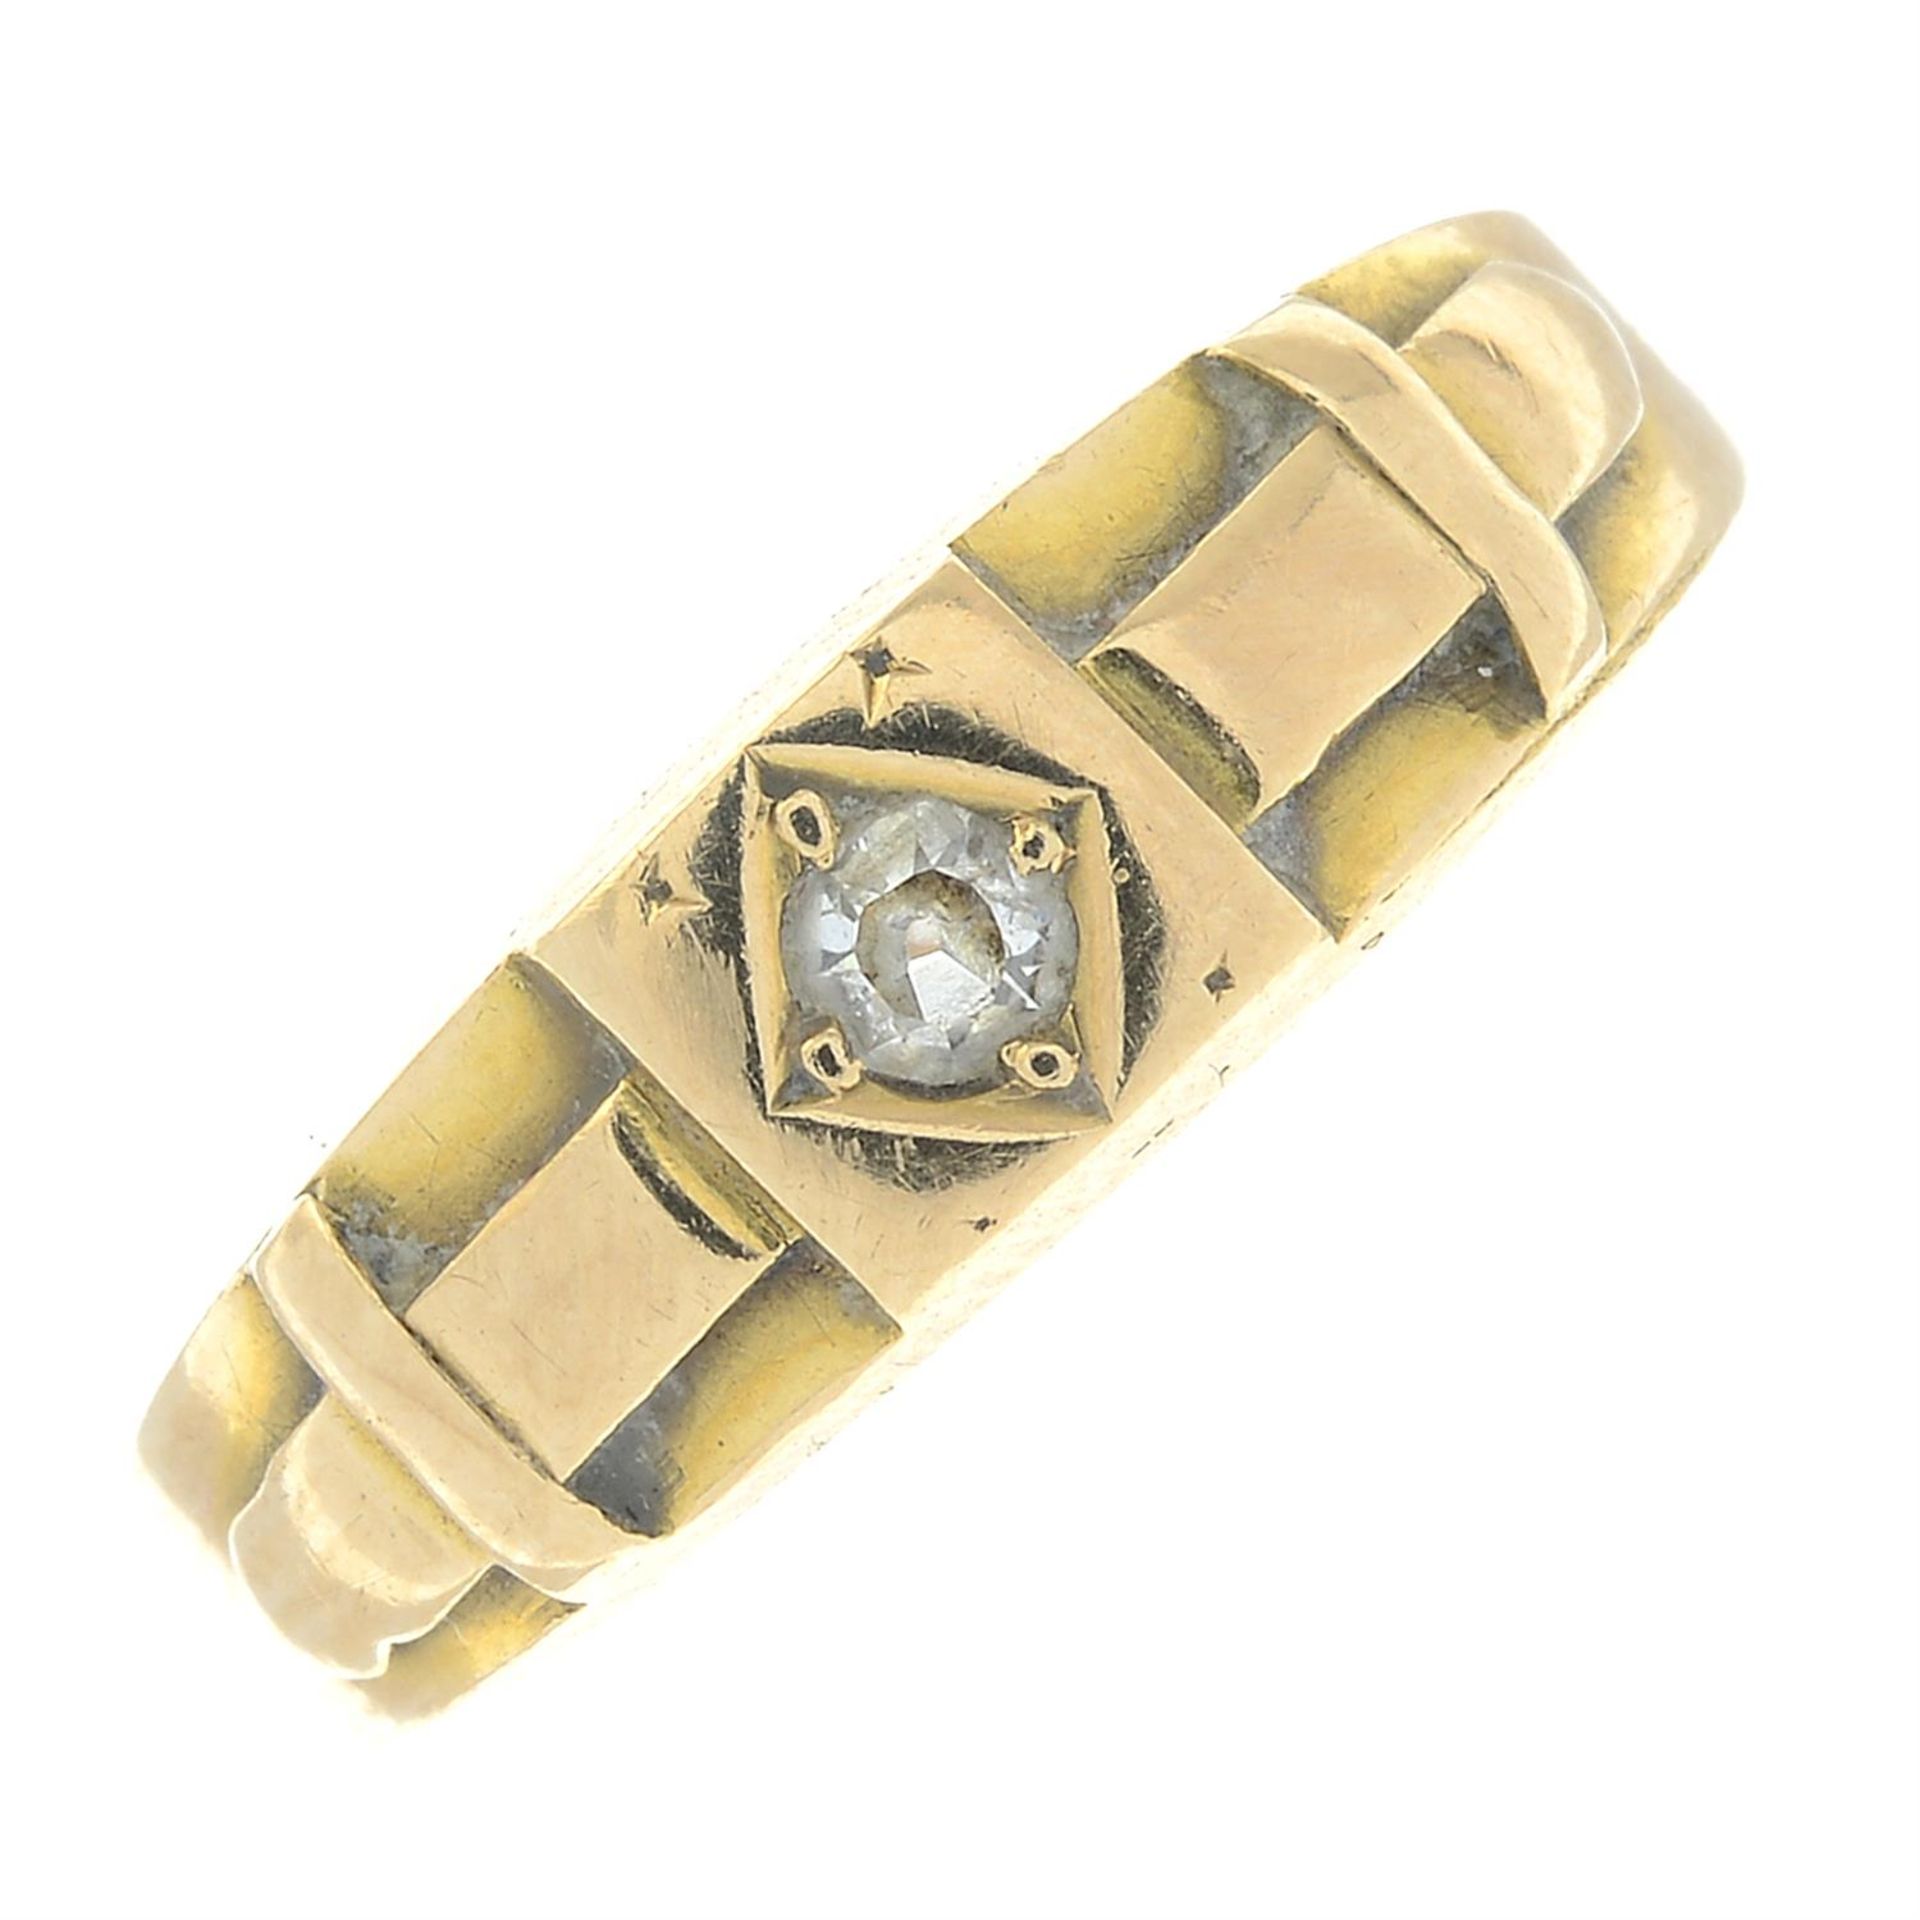 An early 20th century 15ct gold old-cut diamond ring.